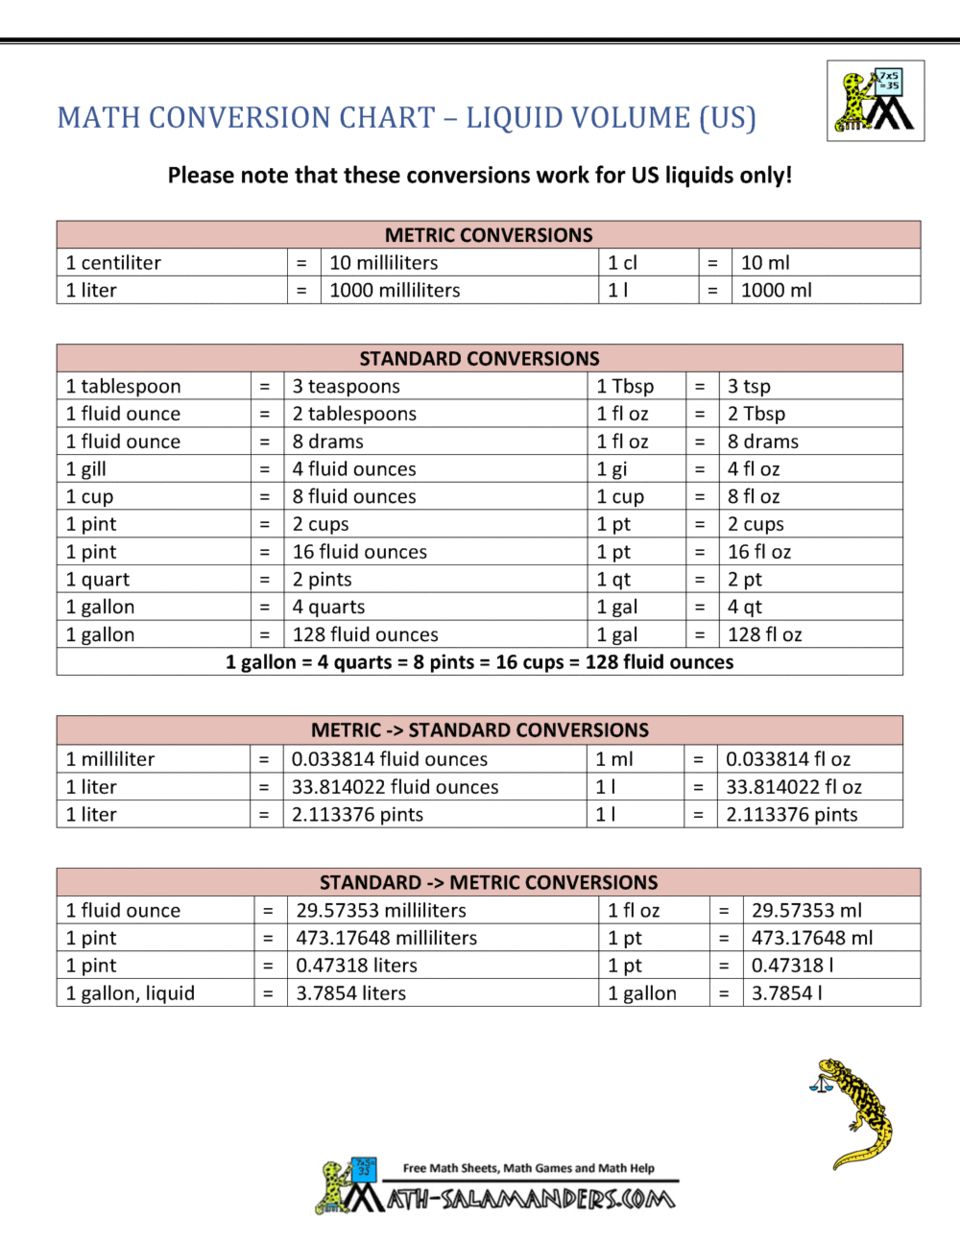 Metric to standard conversion chart US